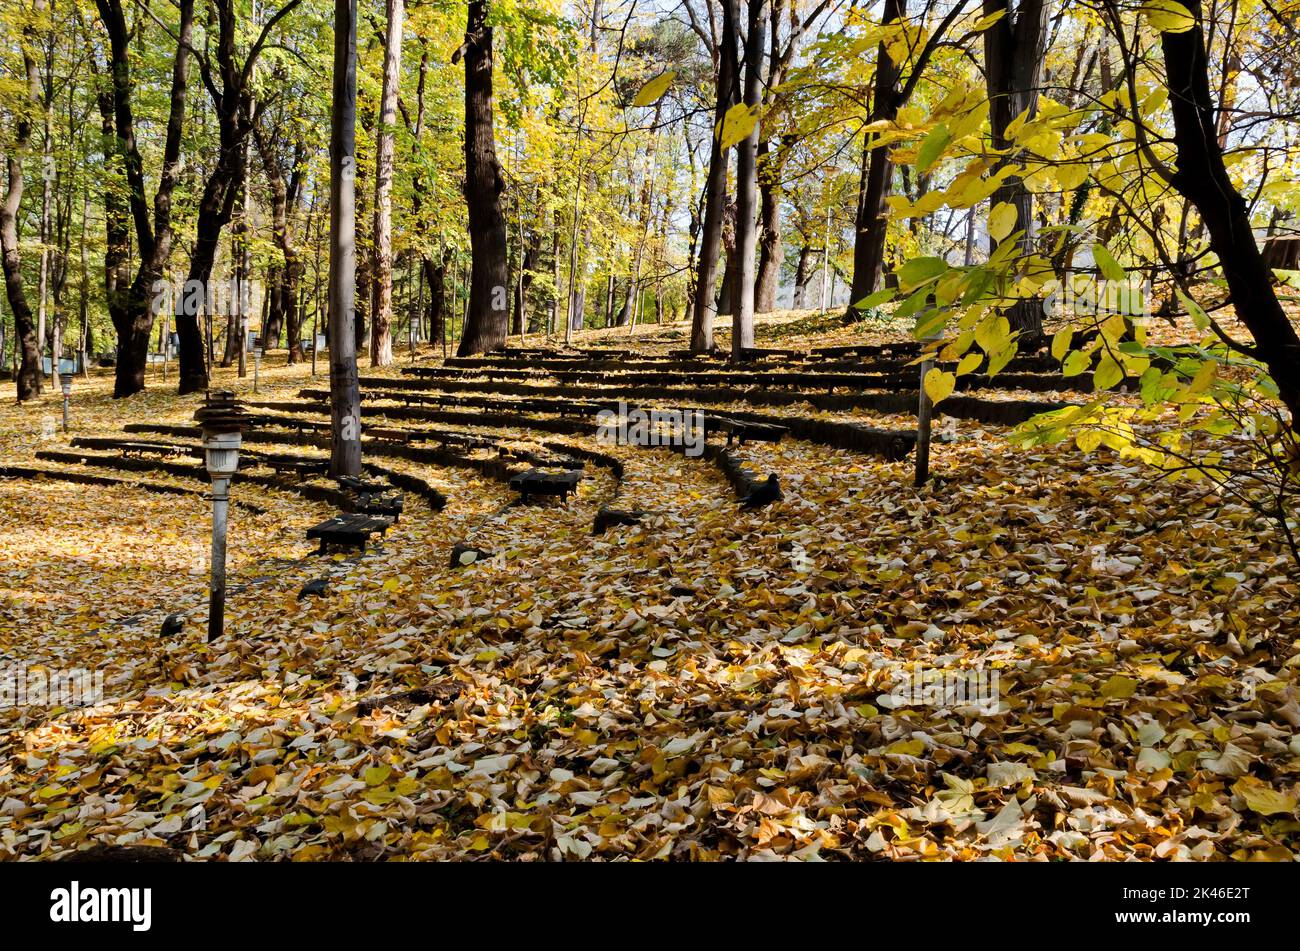 Perennial improvised amphitheater in a colorful autumn forest with branching trees with beautiful leaves, some of which profusely covered the ground, Stock Photo